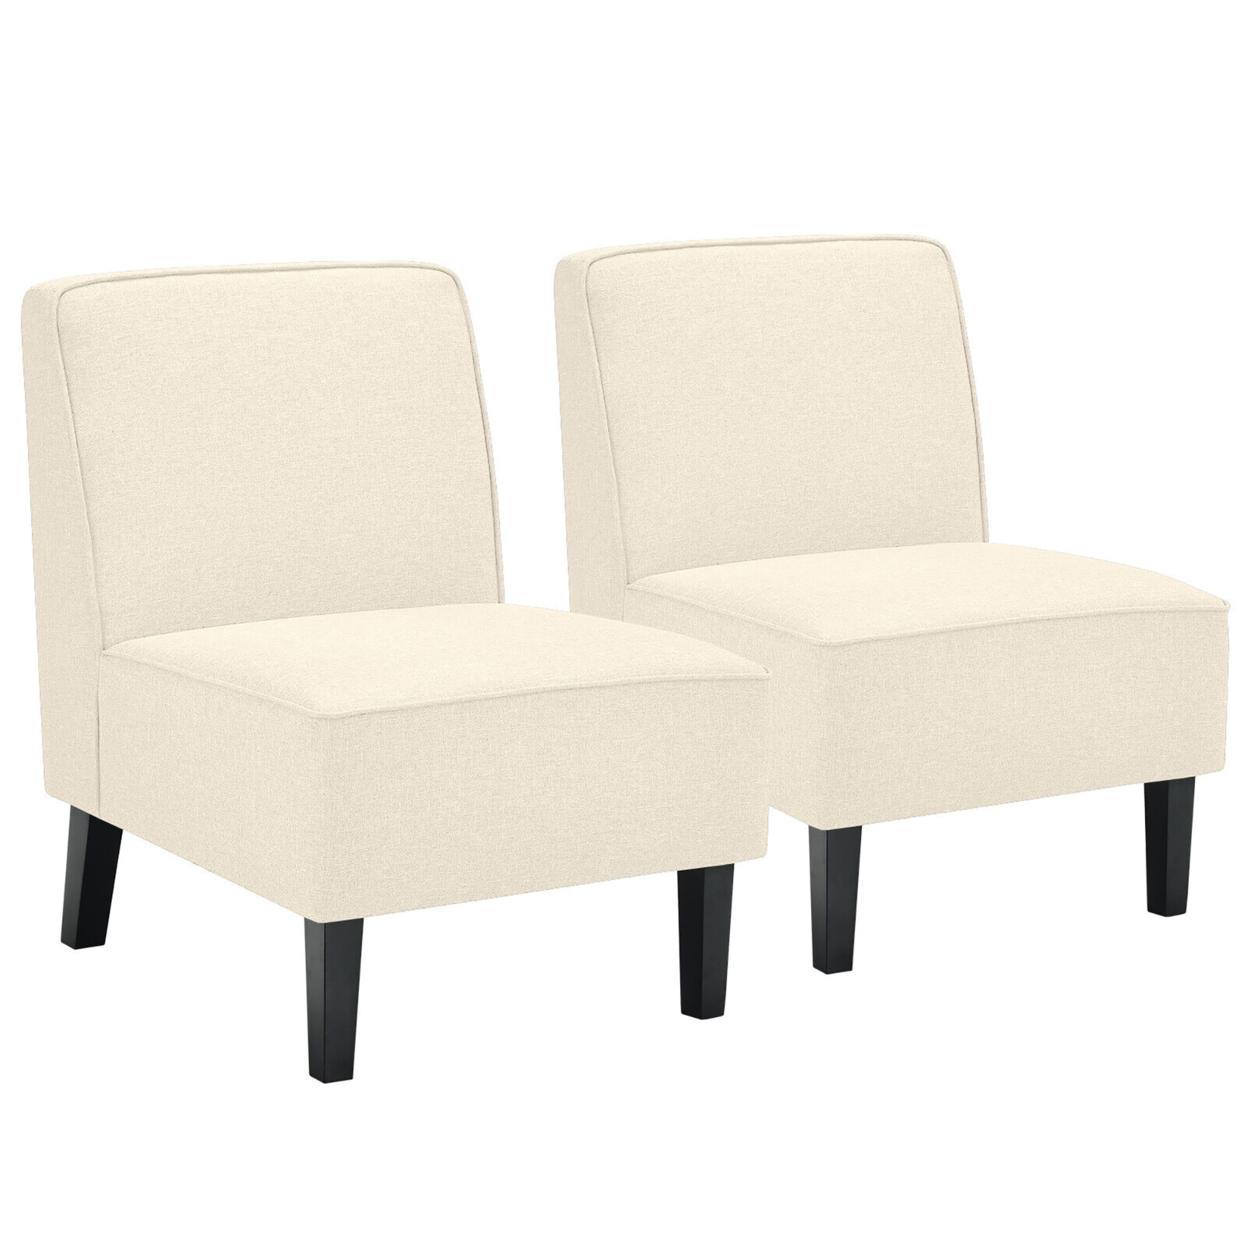 Set Of 2 Armless Accent Chair Fabric Single Sofa W/ Rubber Wood Legs Beige